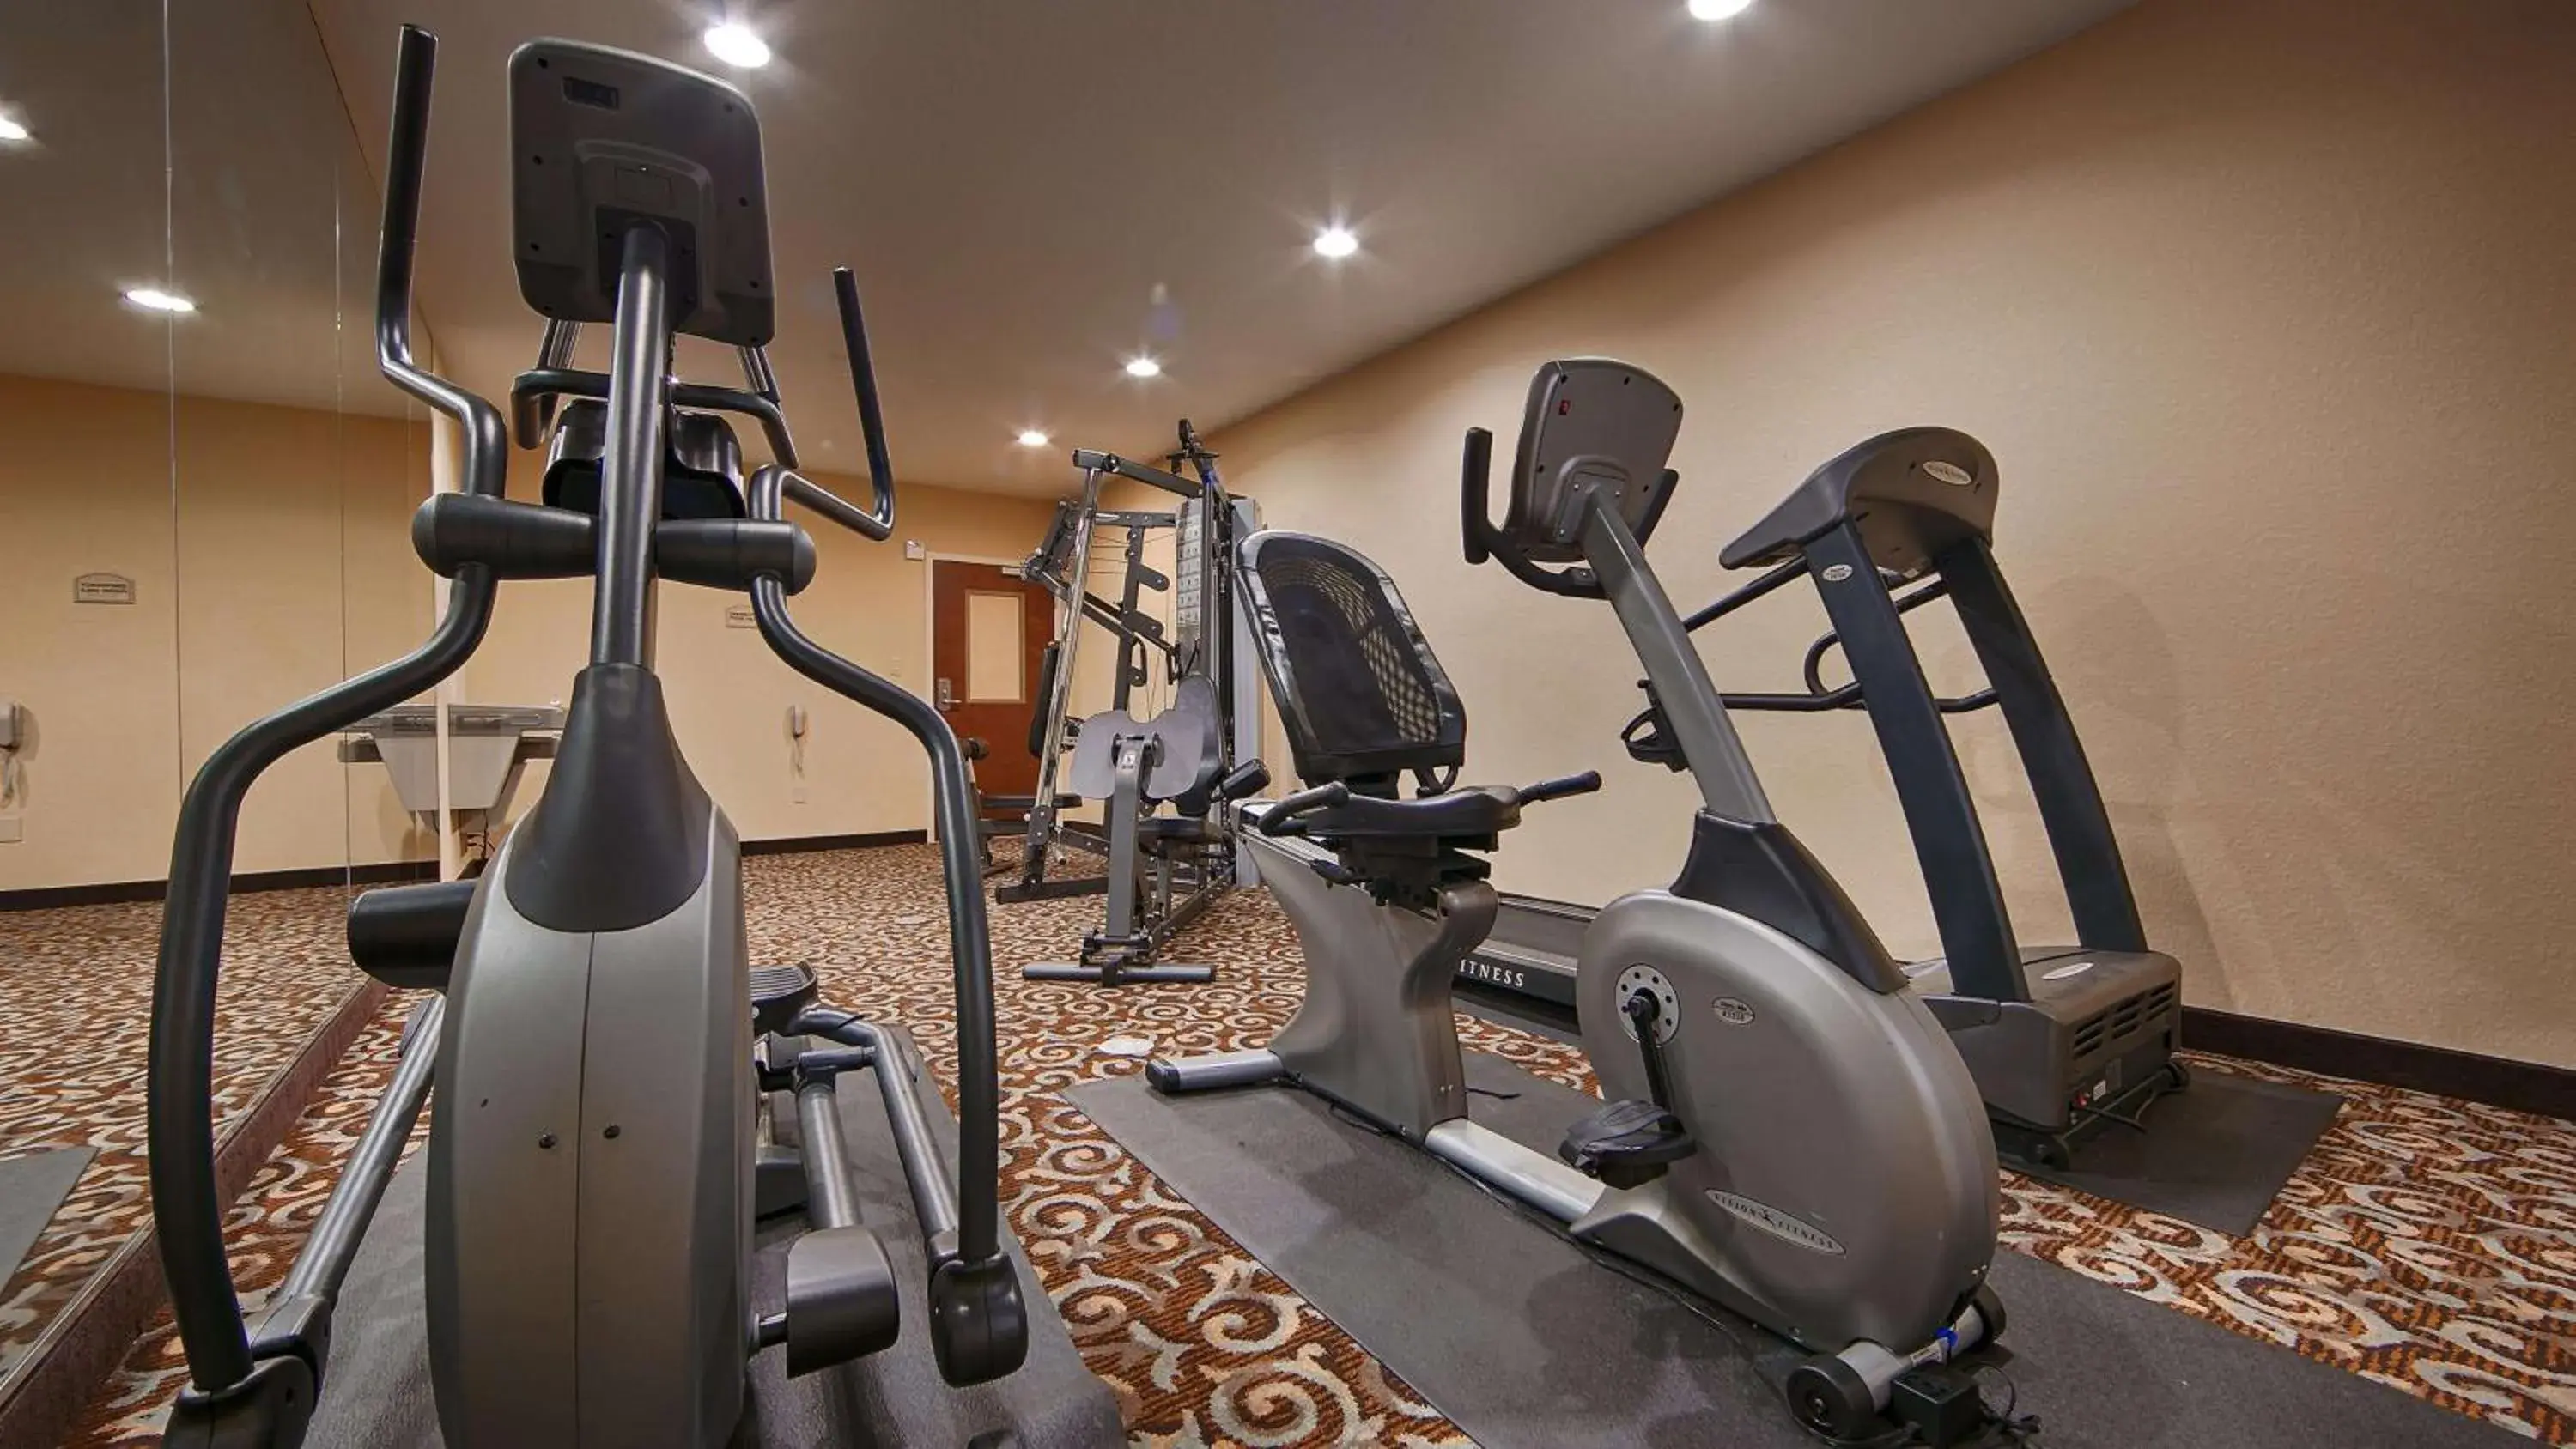 Fitness centre/facilities, Fitness Center/Facilities in Best Western Bastrop Pines Inn